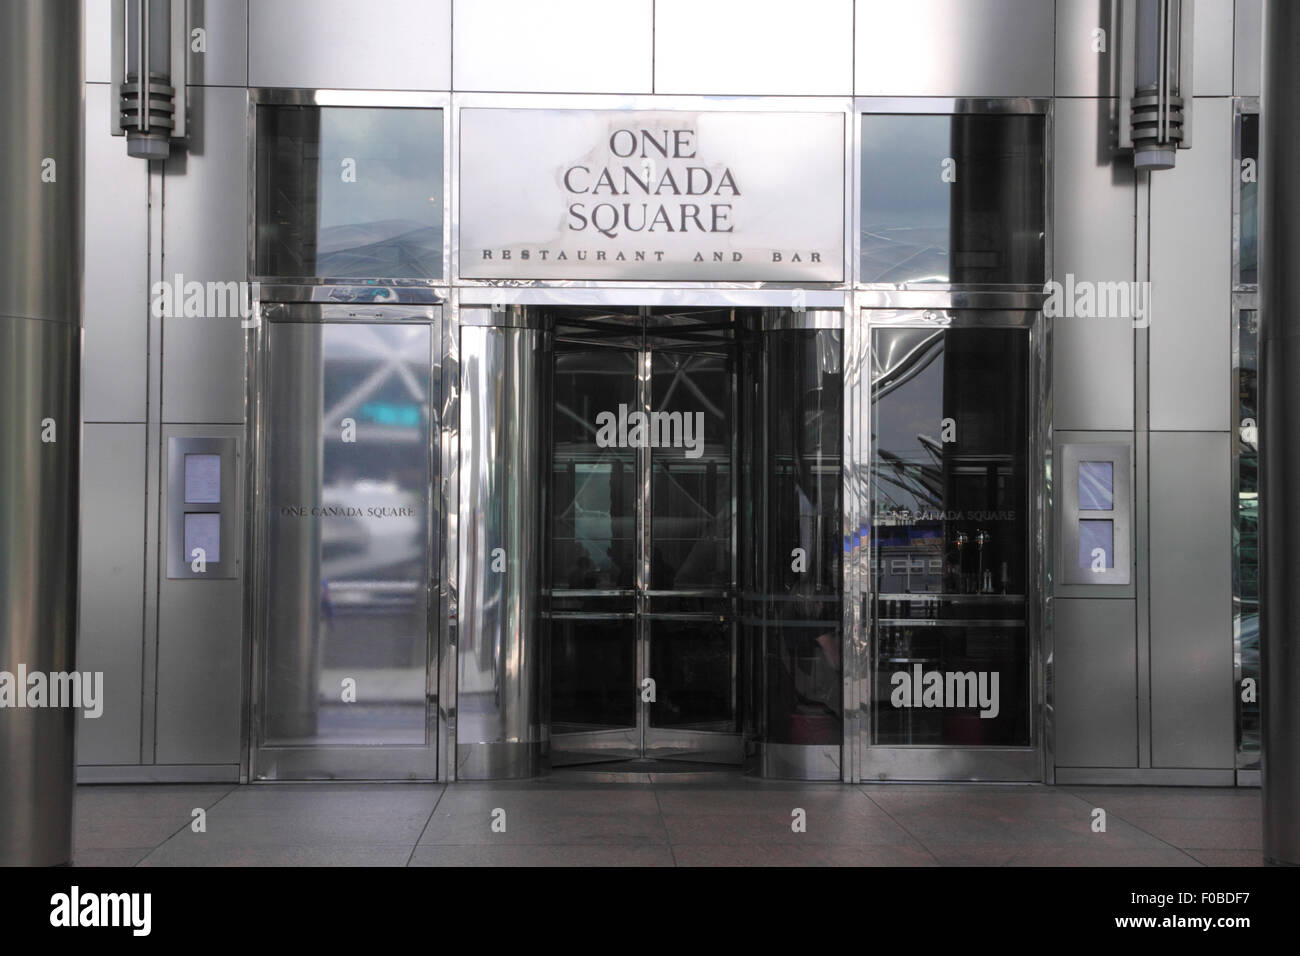 Entrance to One Canada Square Restaurant and Bar Canary Wharf London Stock Photo